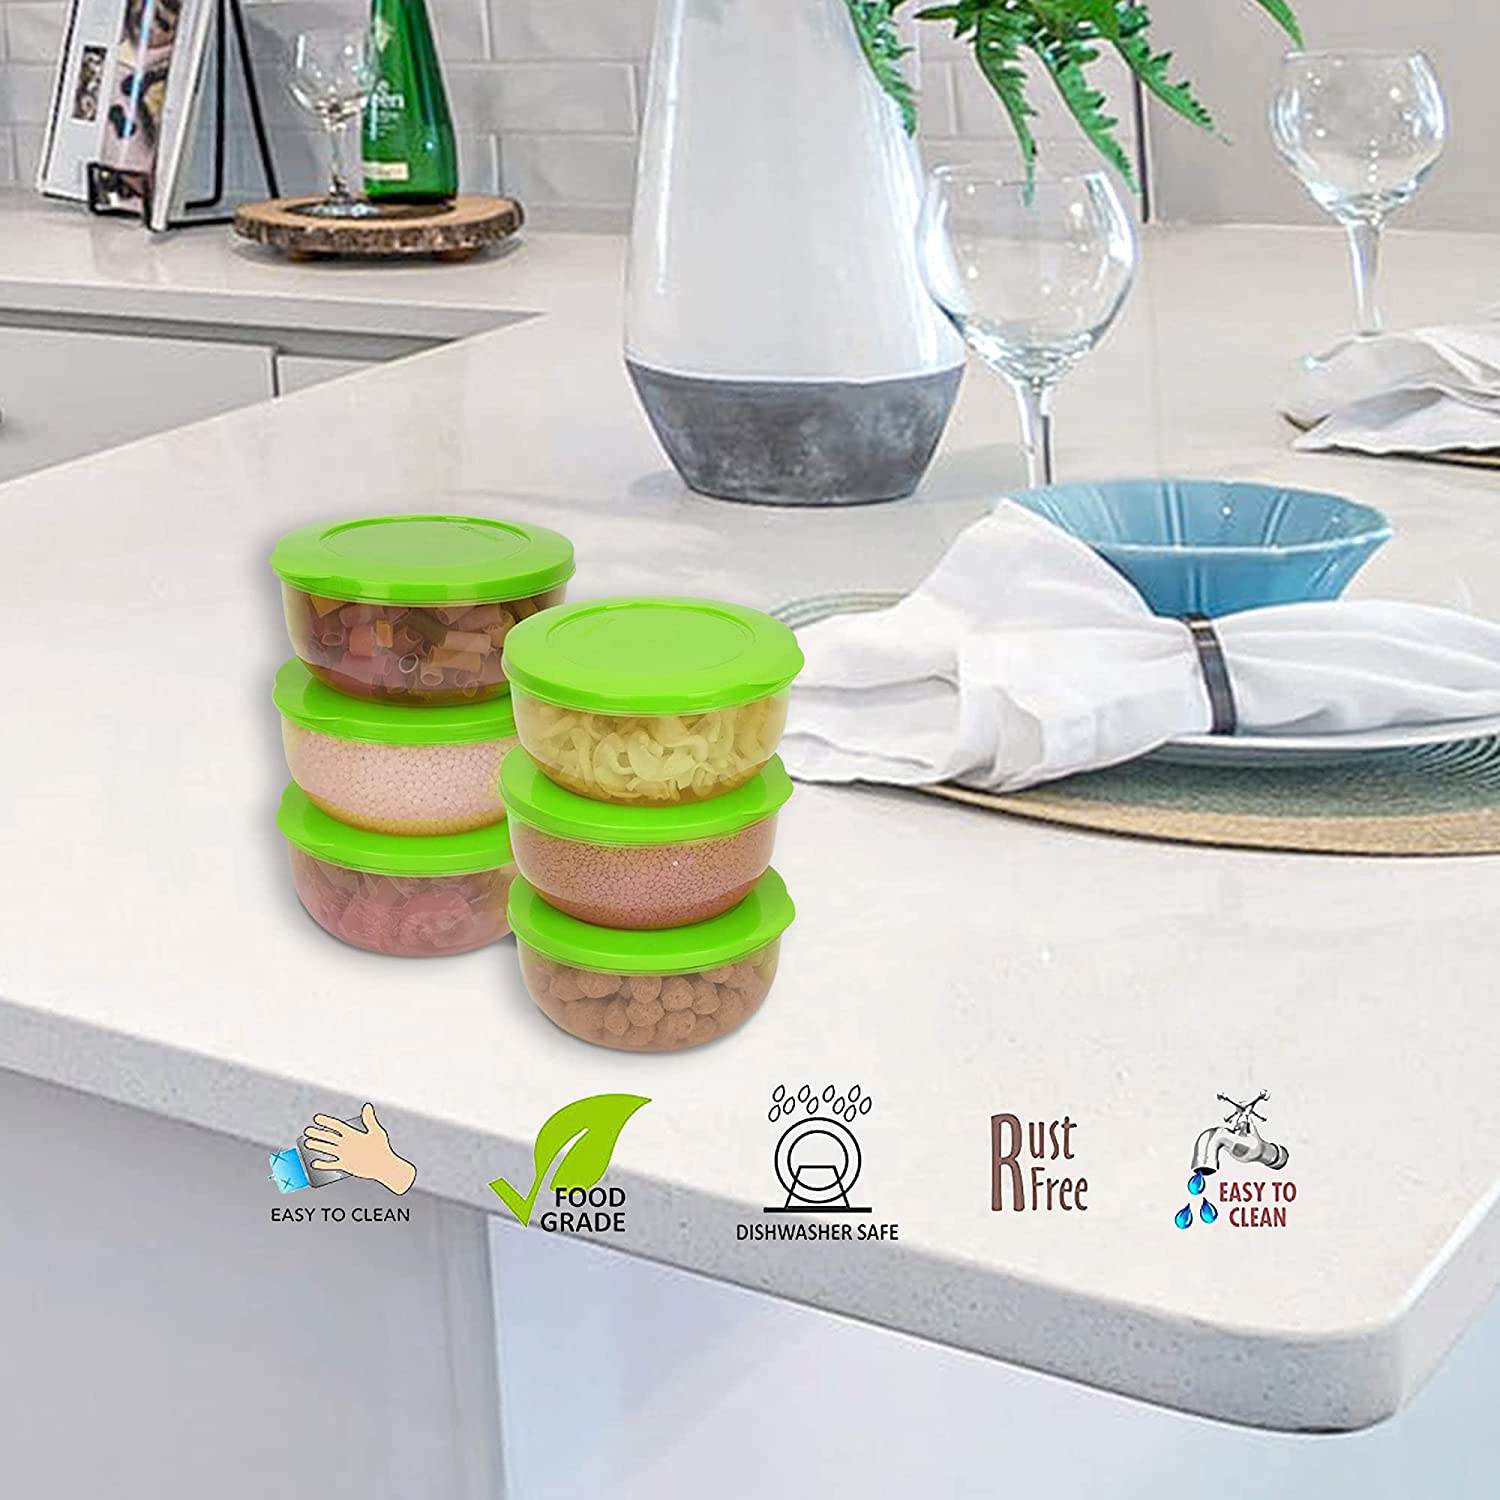 Cutting EDGE Eco-Storage Plastic Container & Organizer Set for Kitchen, Refrigerator, Home Use, Lunch & Food Storage ( Set Of 6)